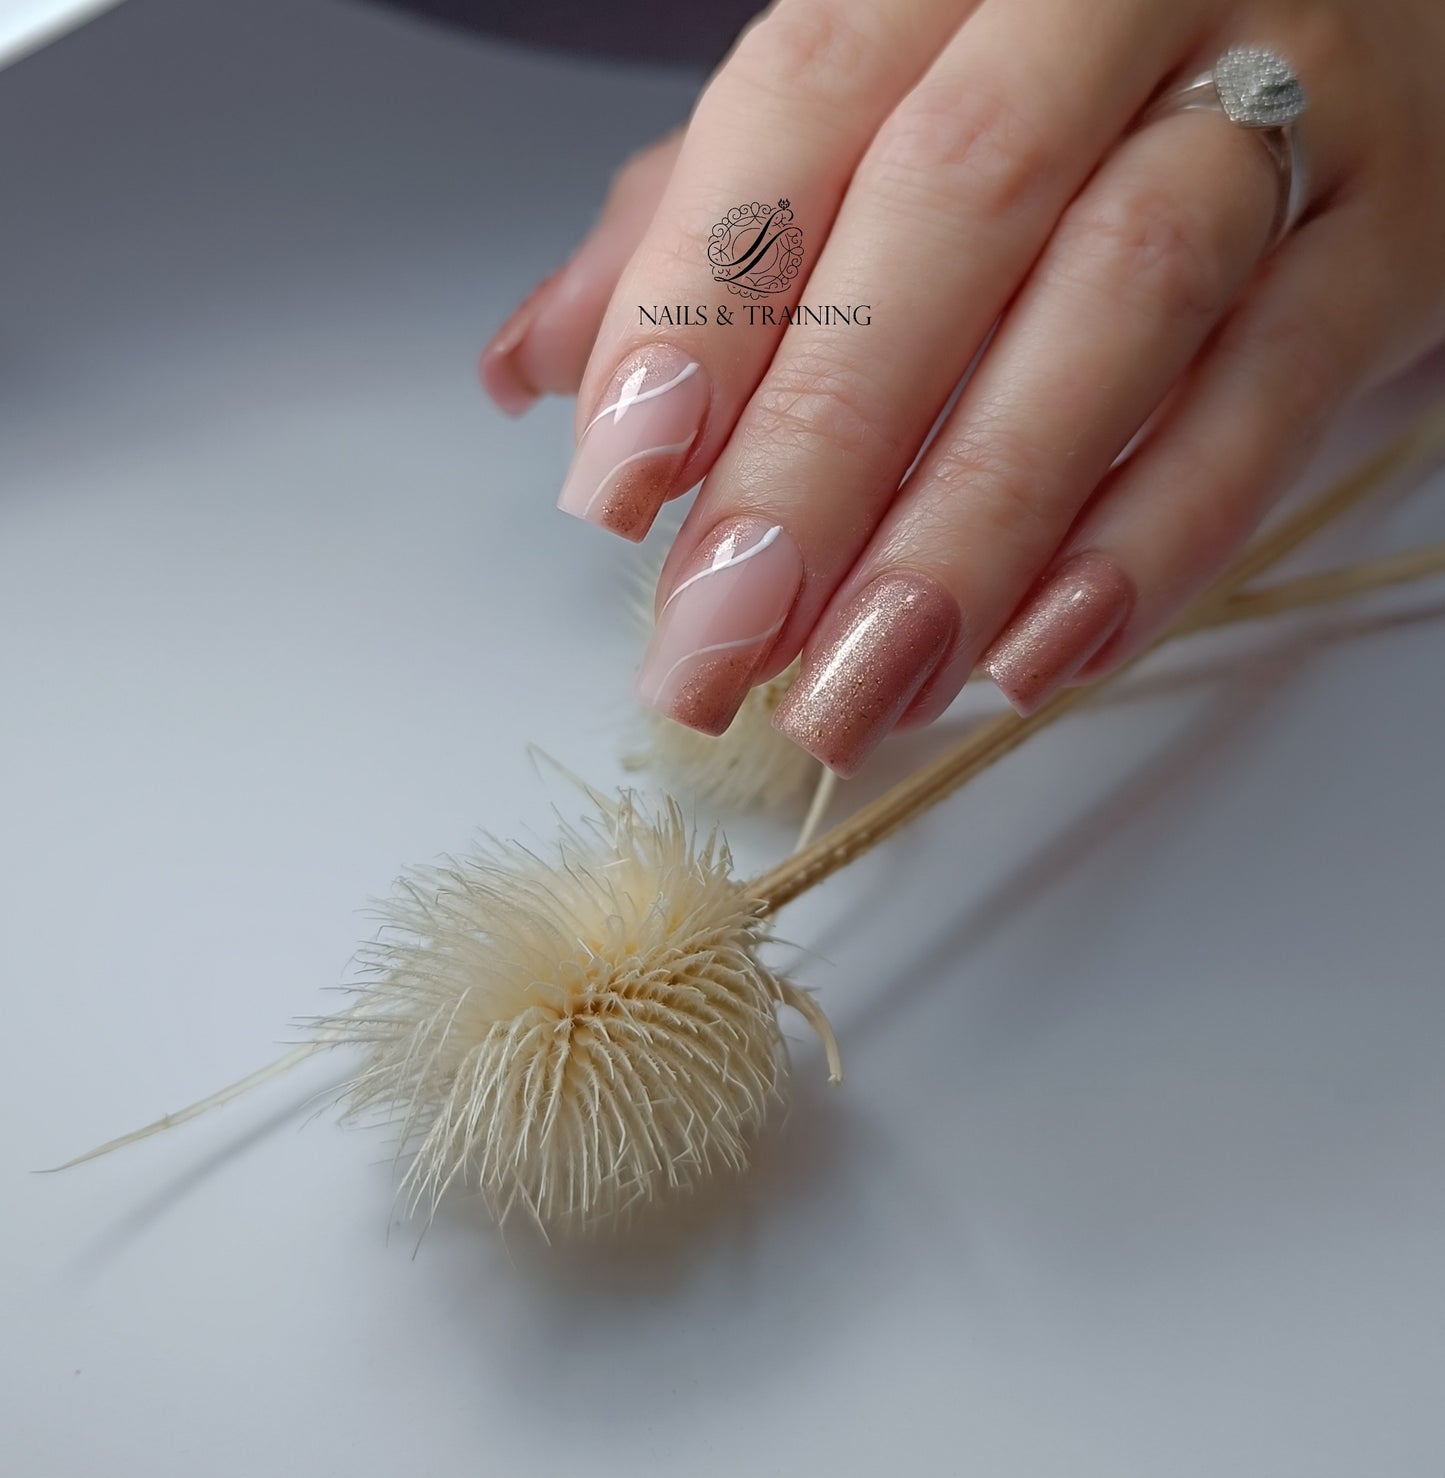 POLYGEL NAILS EXTENSIONS COURSE